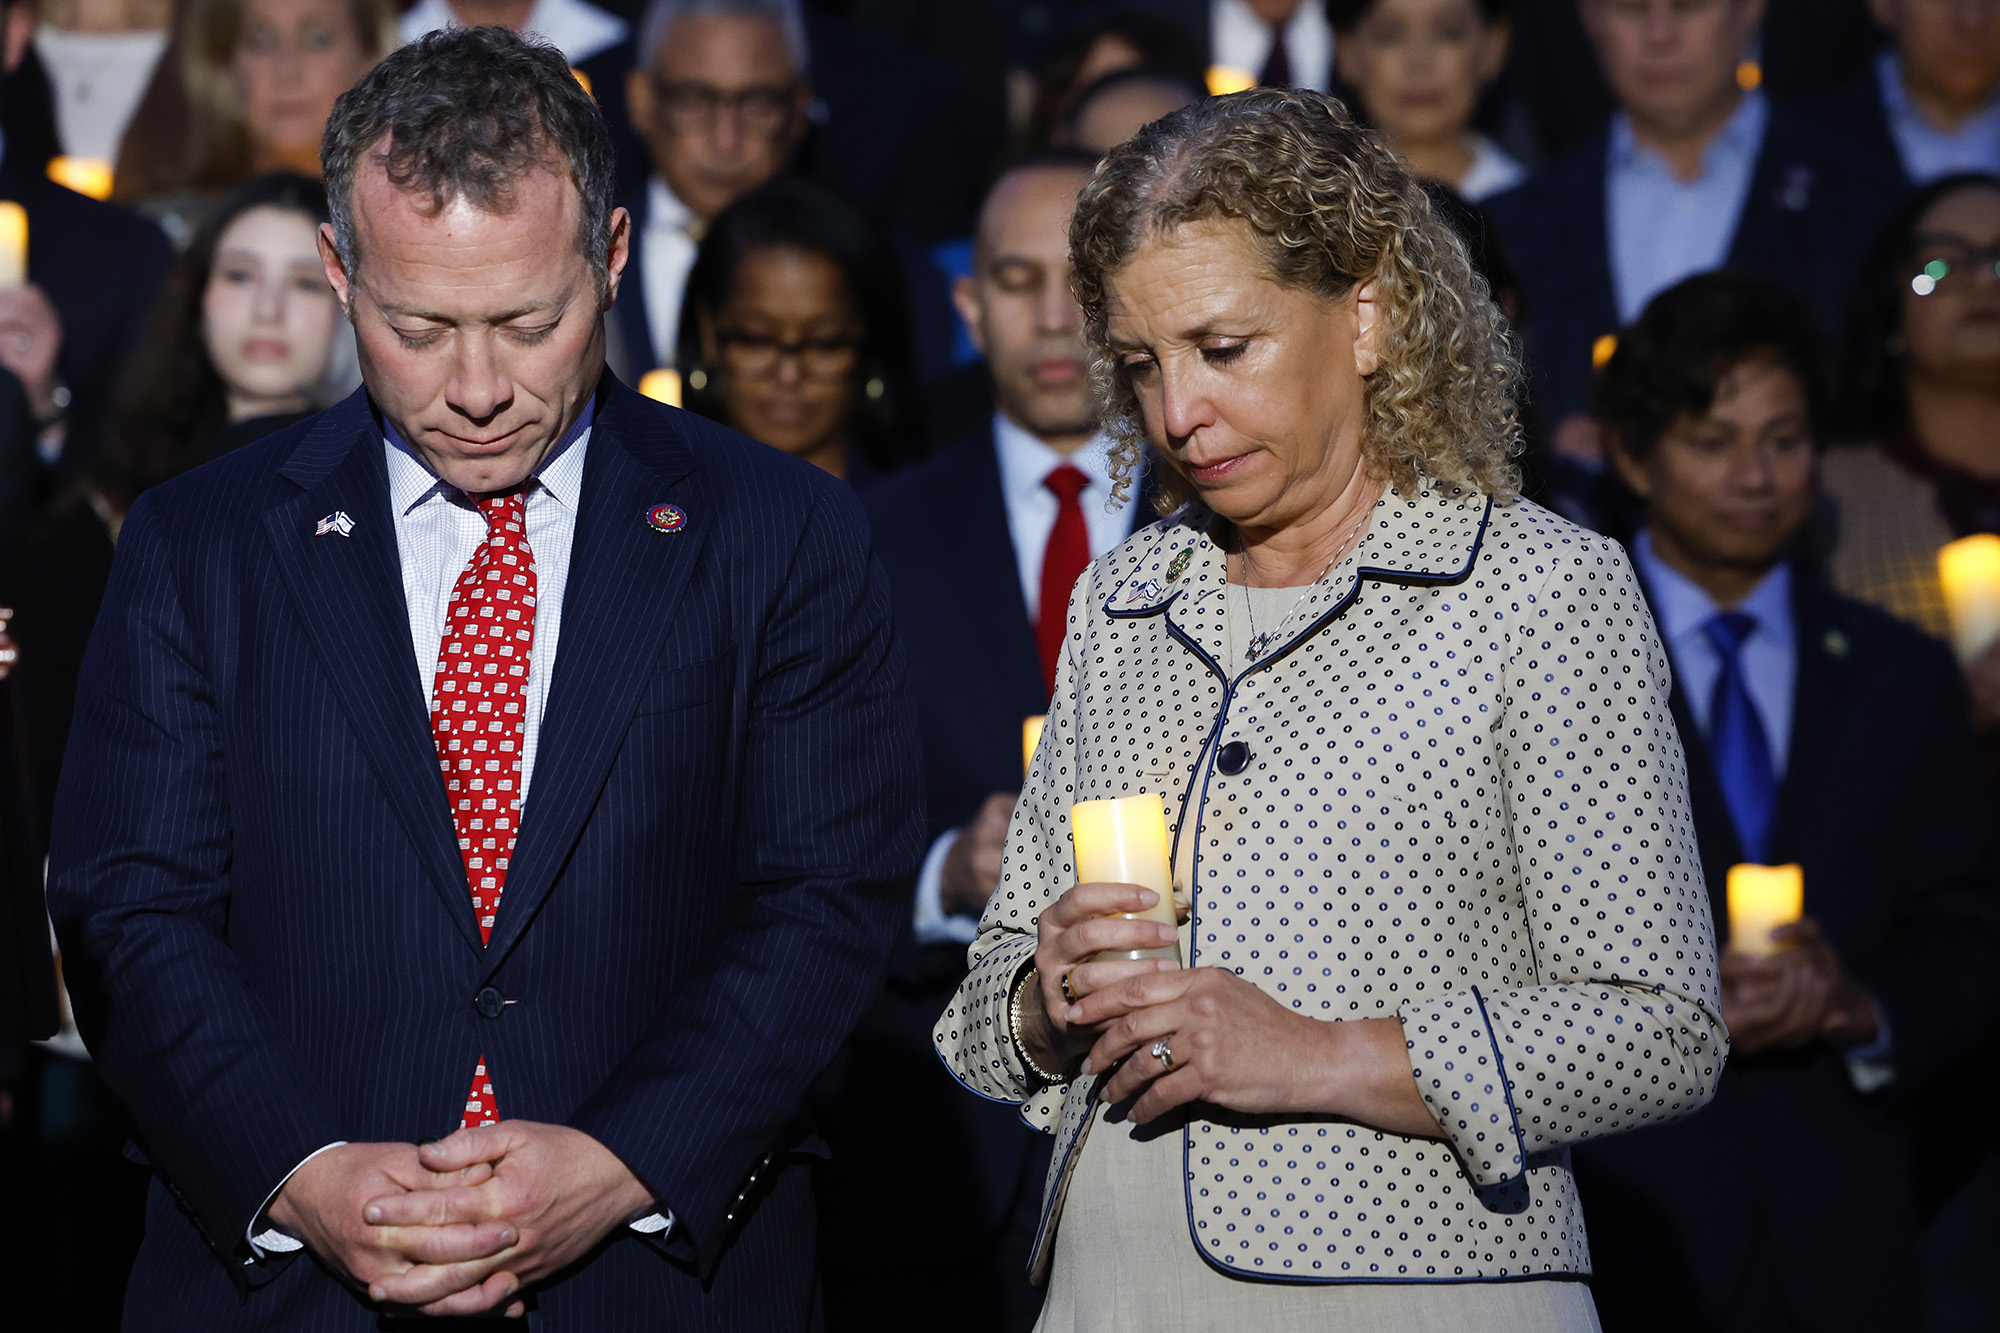 Josh Gottheimer and Rep. Debbie Wasserman Schultz bow their heads during a vigil for Israel on the steps of the U.S. Capitol Building on October 12, 2023 in Washington, DC.